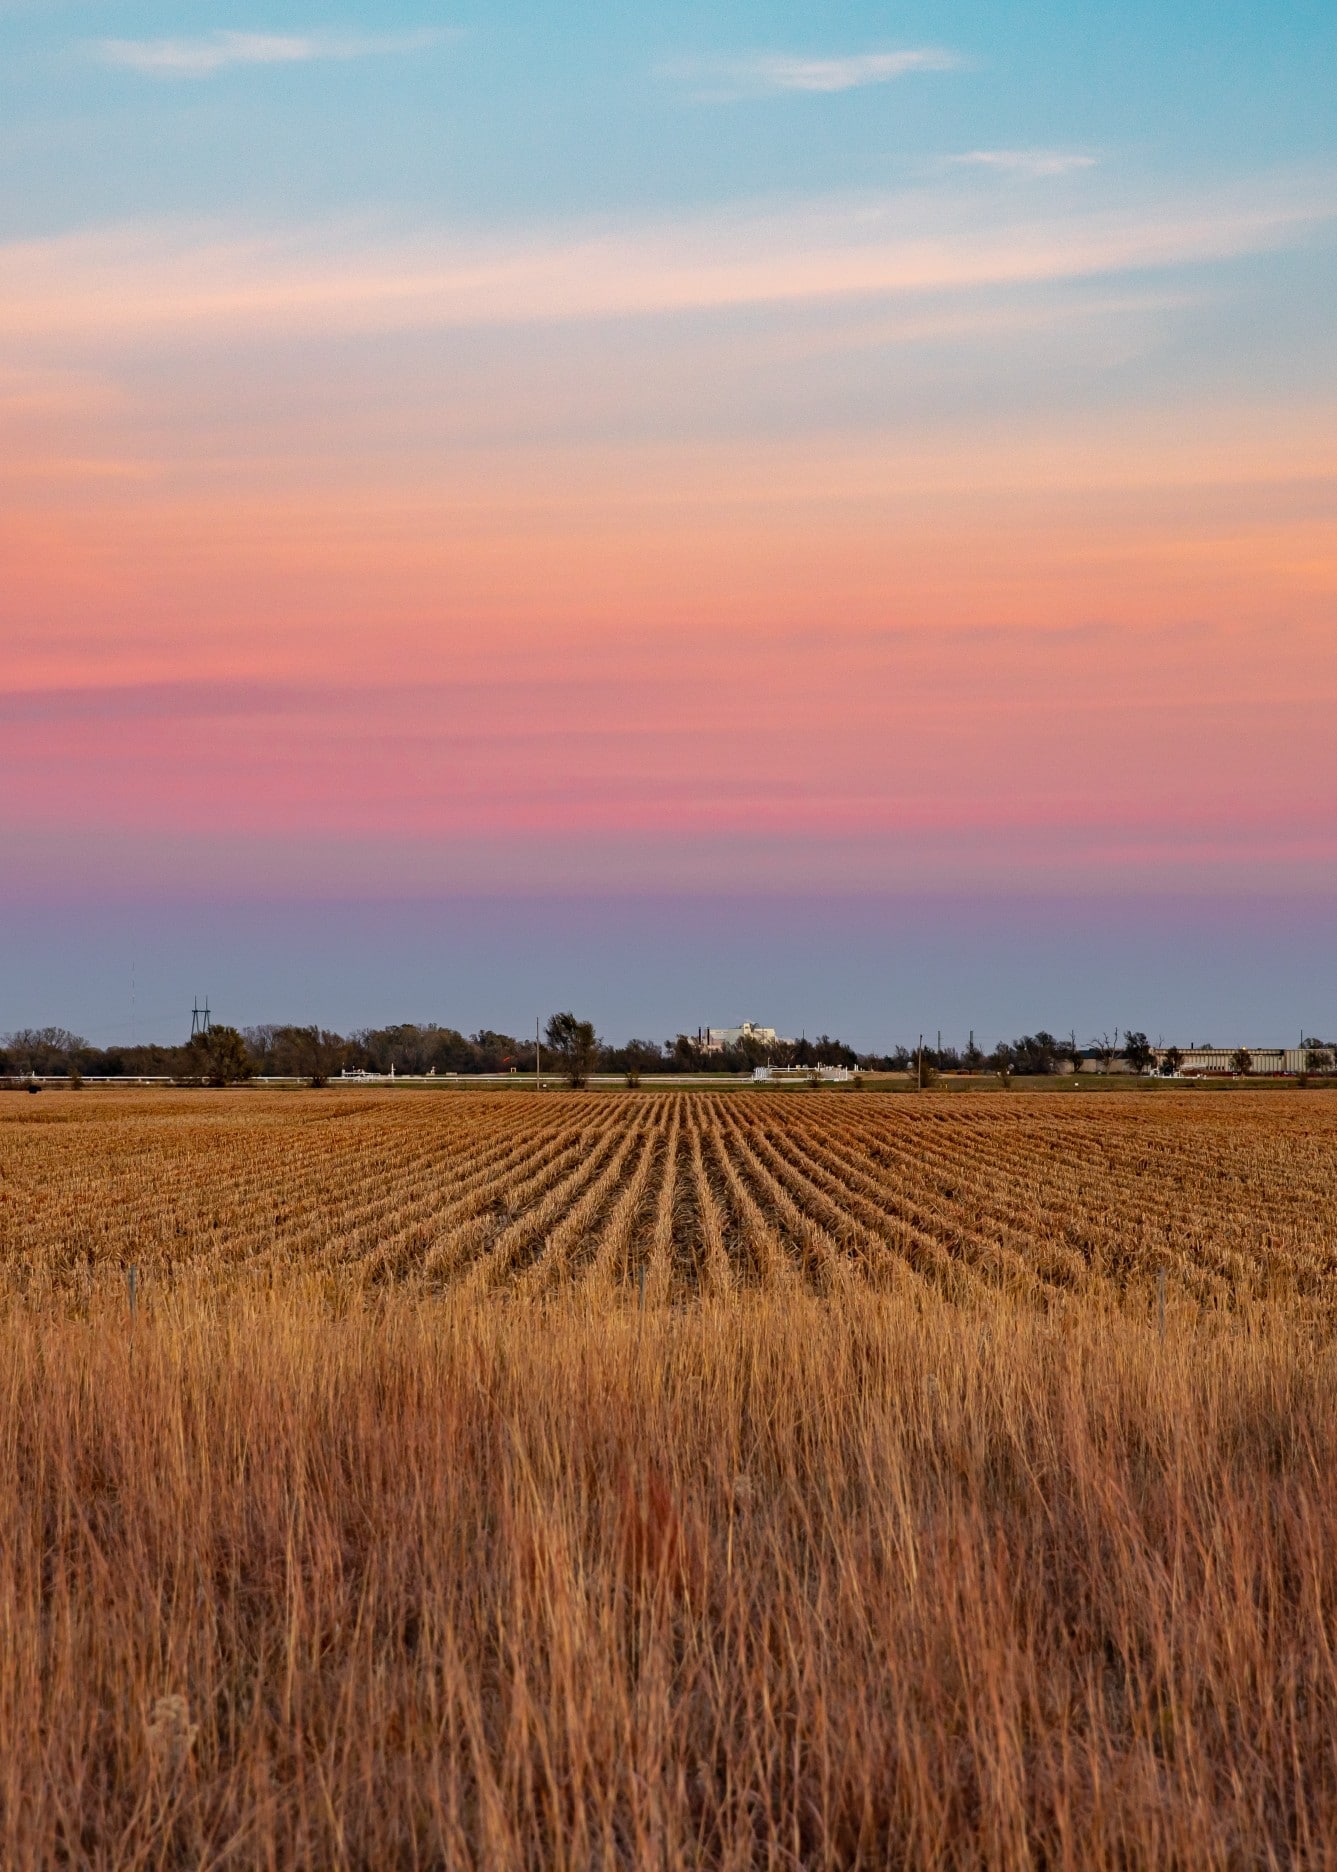 Landscape of a sunset over a dry plowed crop field out in the country